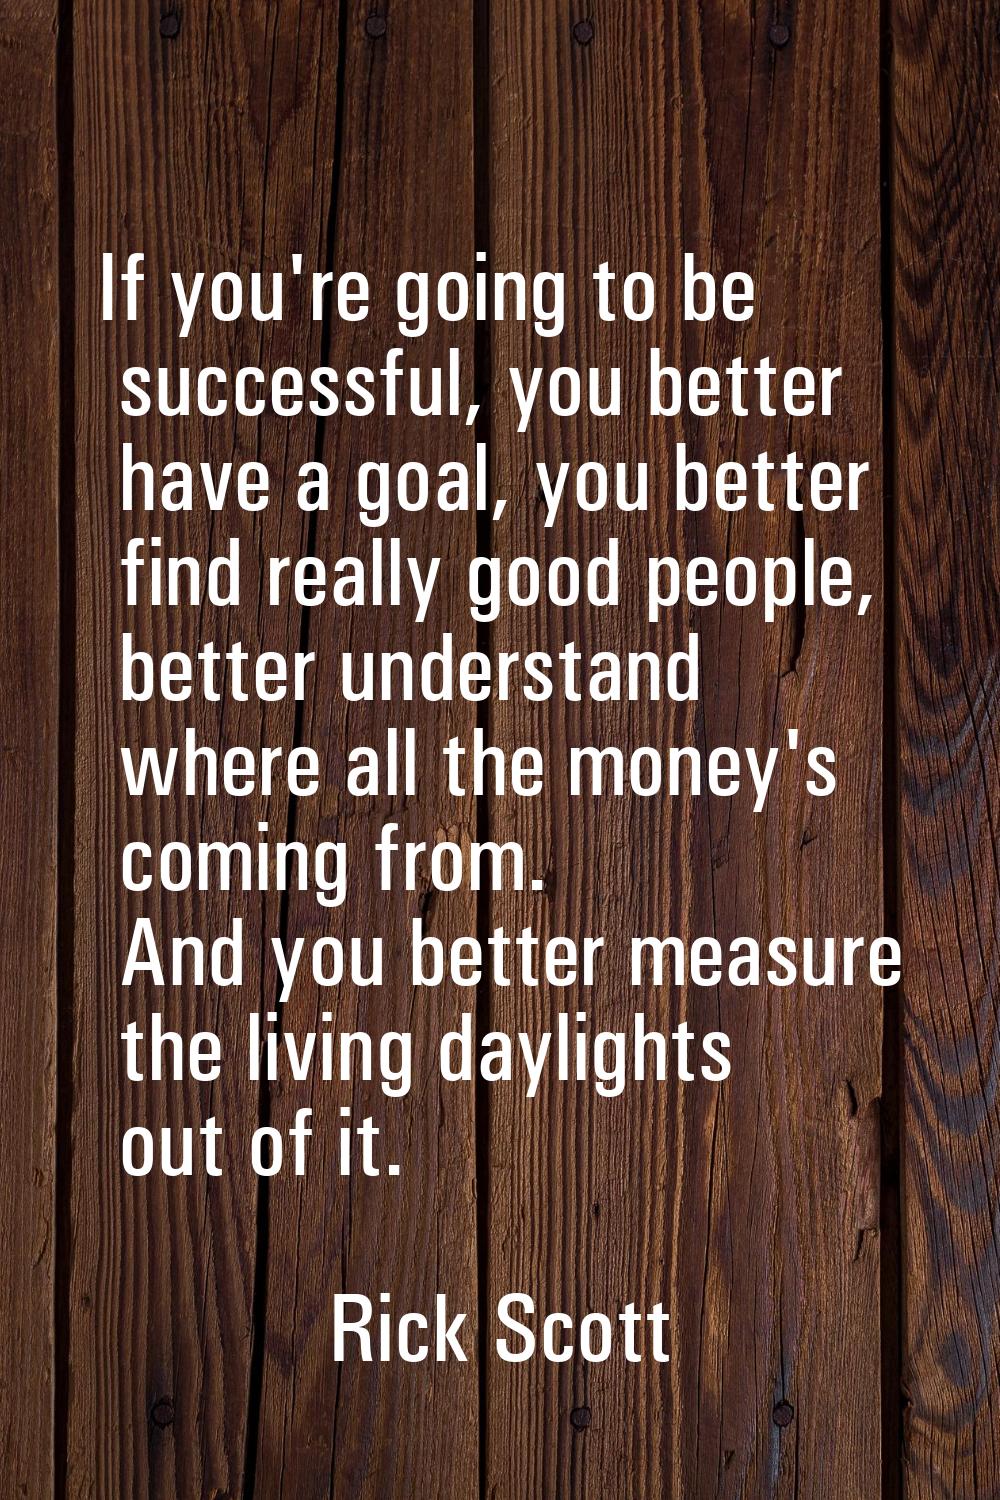 If you're going to be successful, you better have a goal, you better find really good people, bette